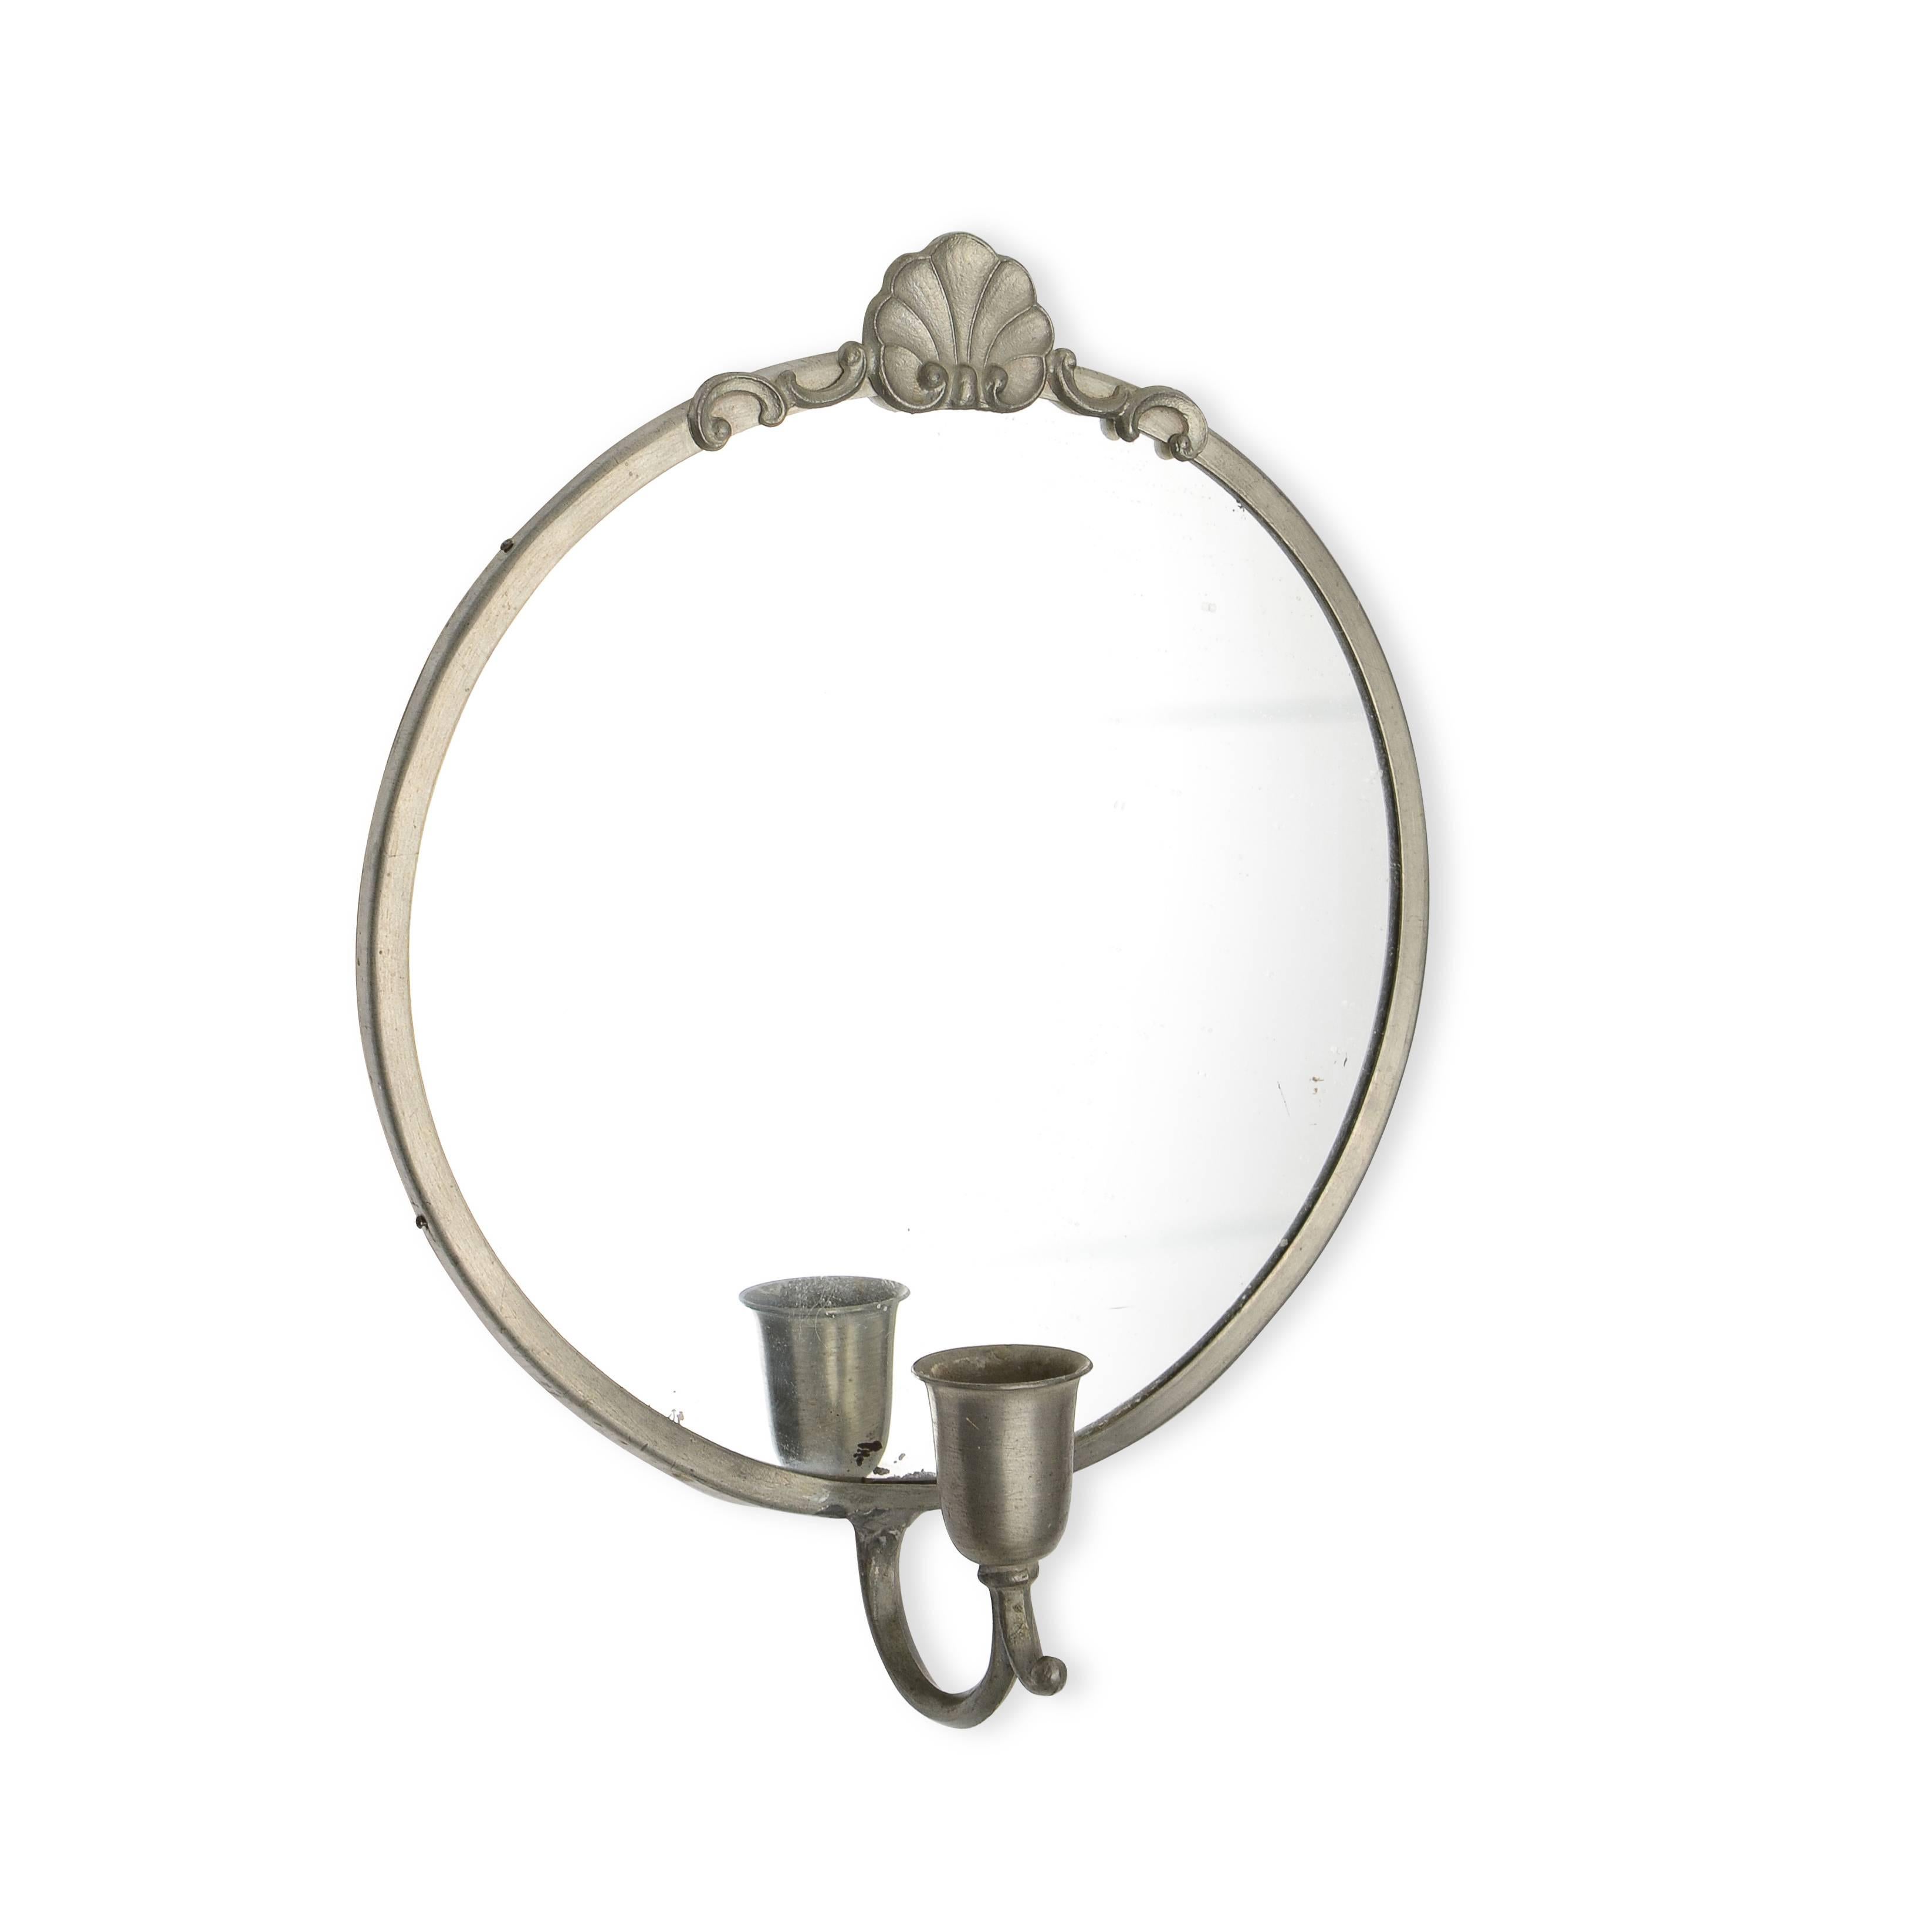 Set of three pewter mirrors, two with candle arms.

Large mirror 16.5